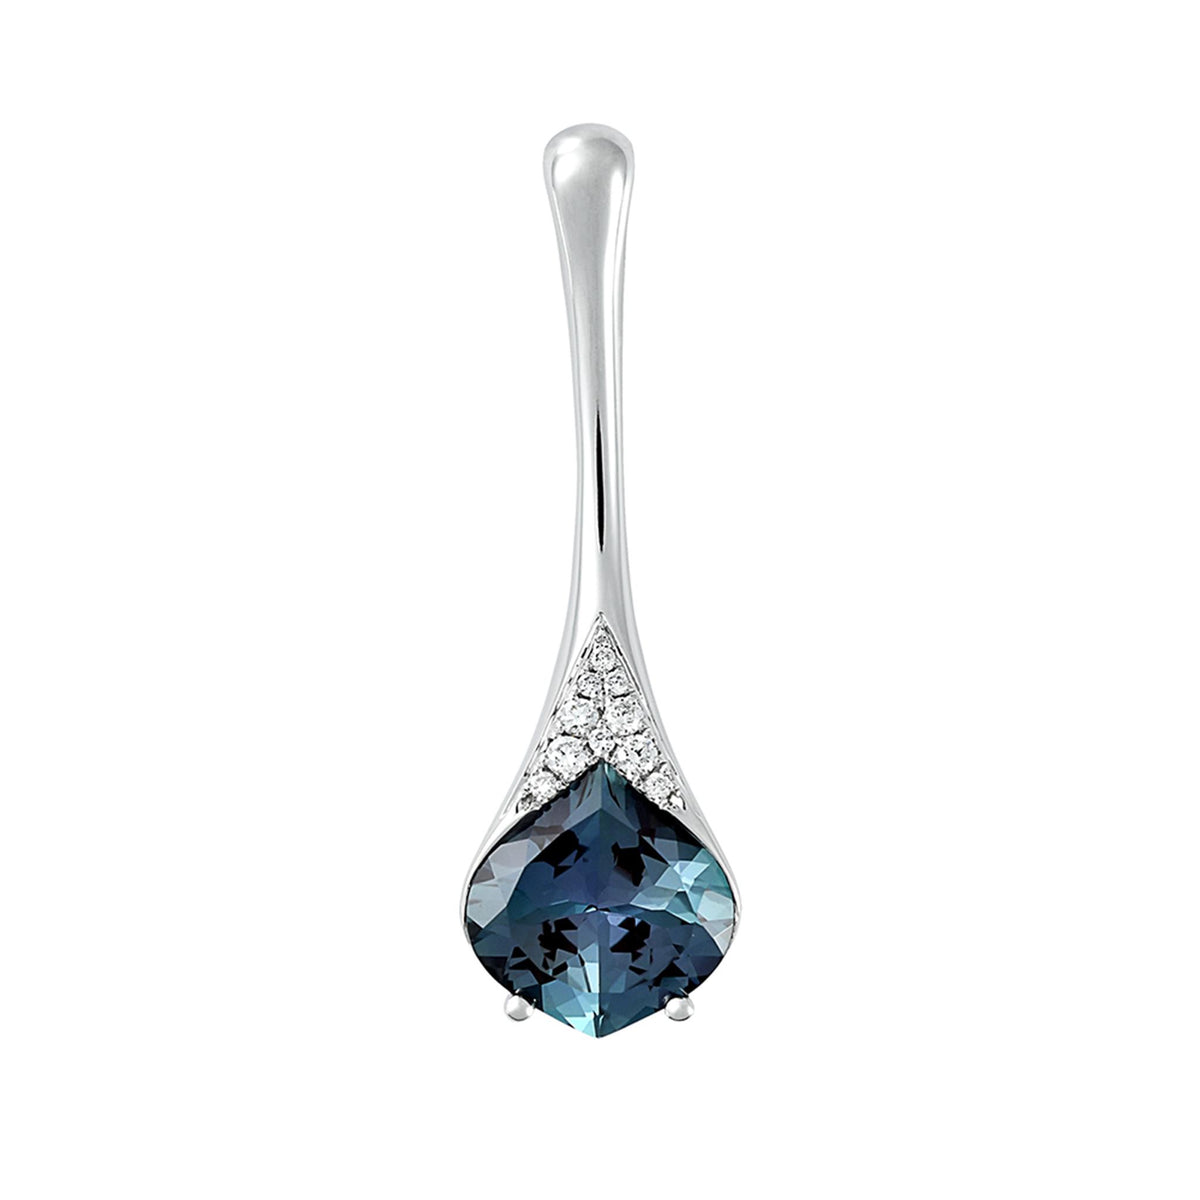 14Kt White Gold Pendant with 2.53ct Chatham Created Alexandrite